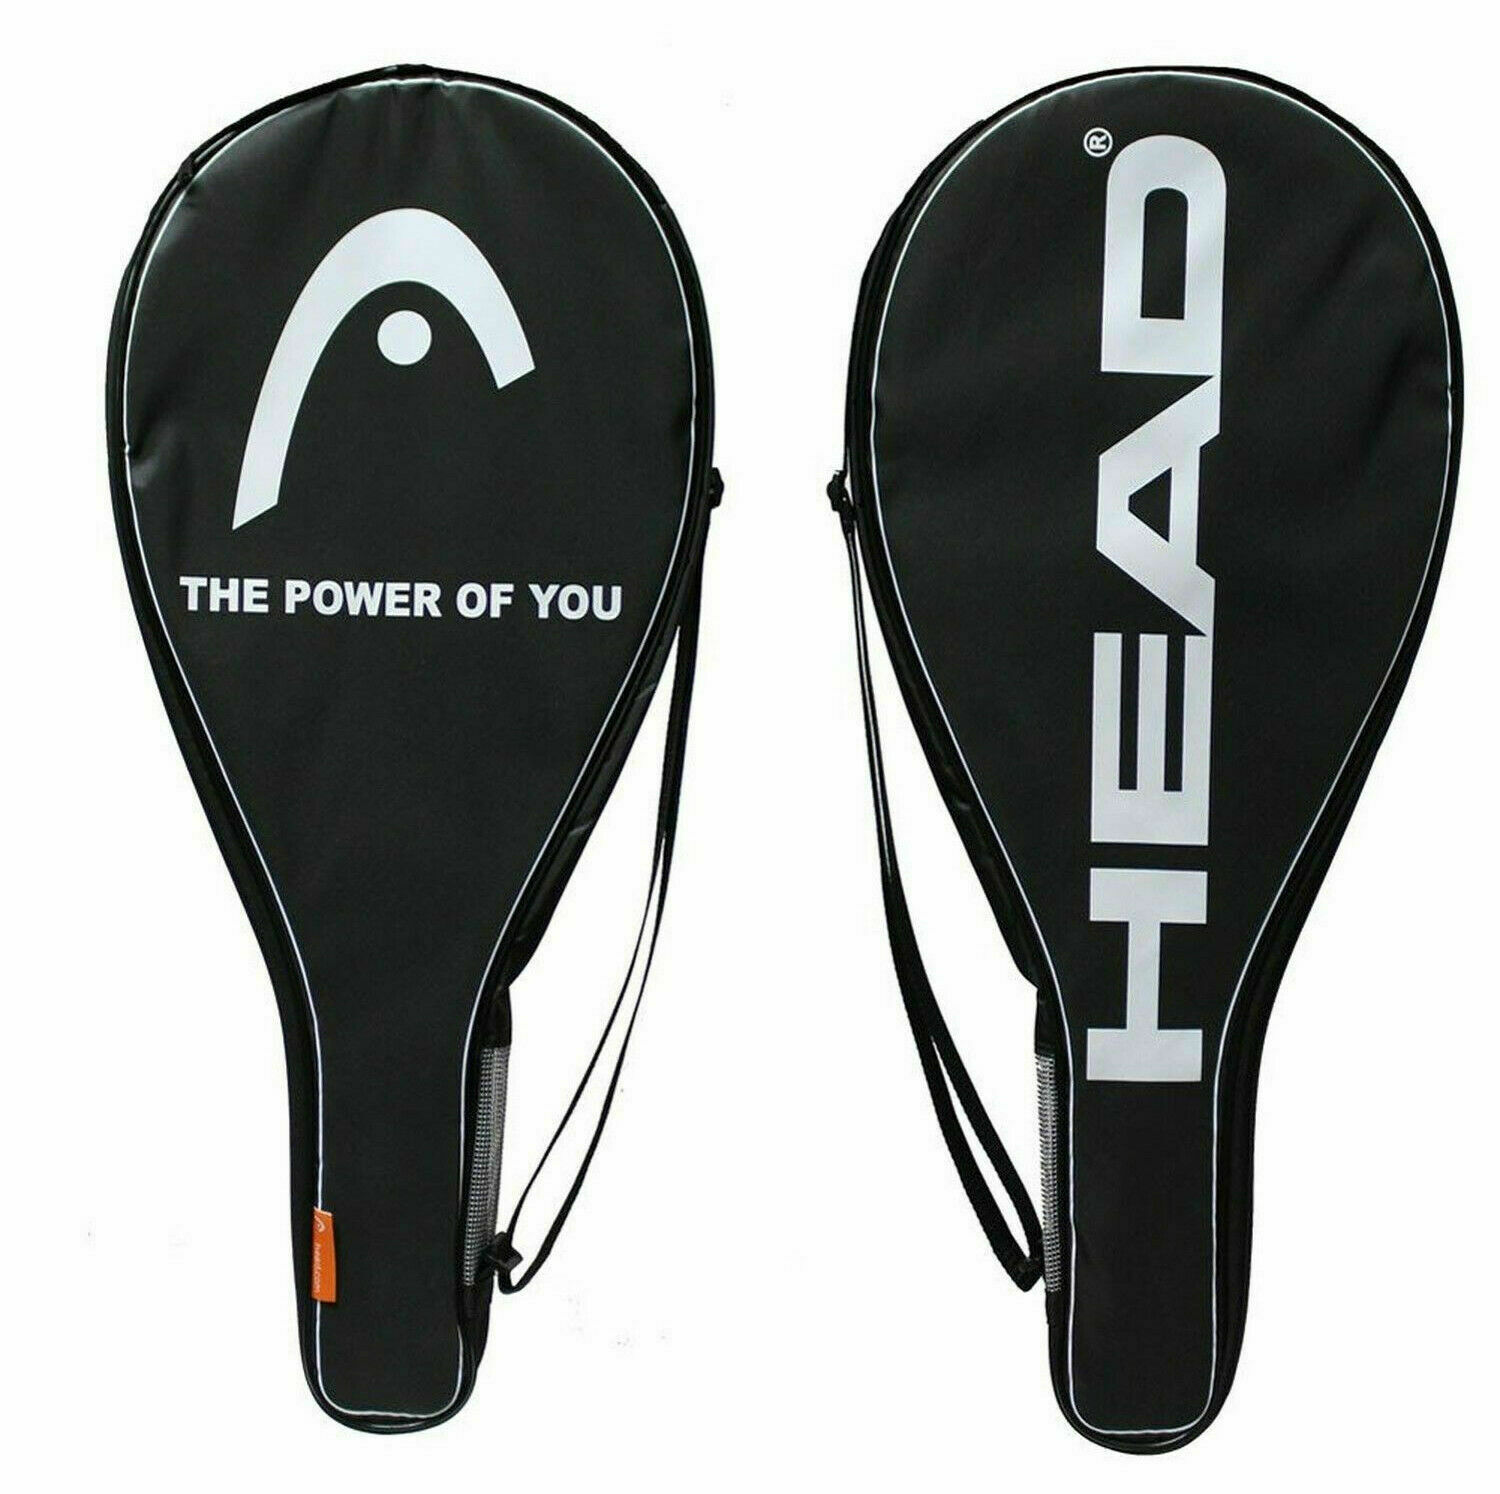 **new** Head "power Of You" Single Tennis Racquet Cover With Strap